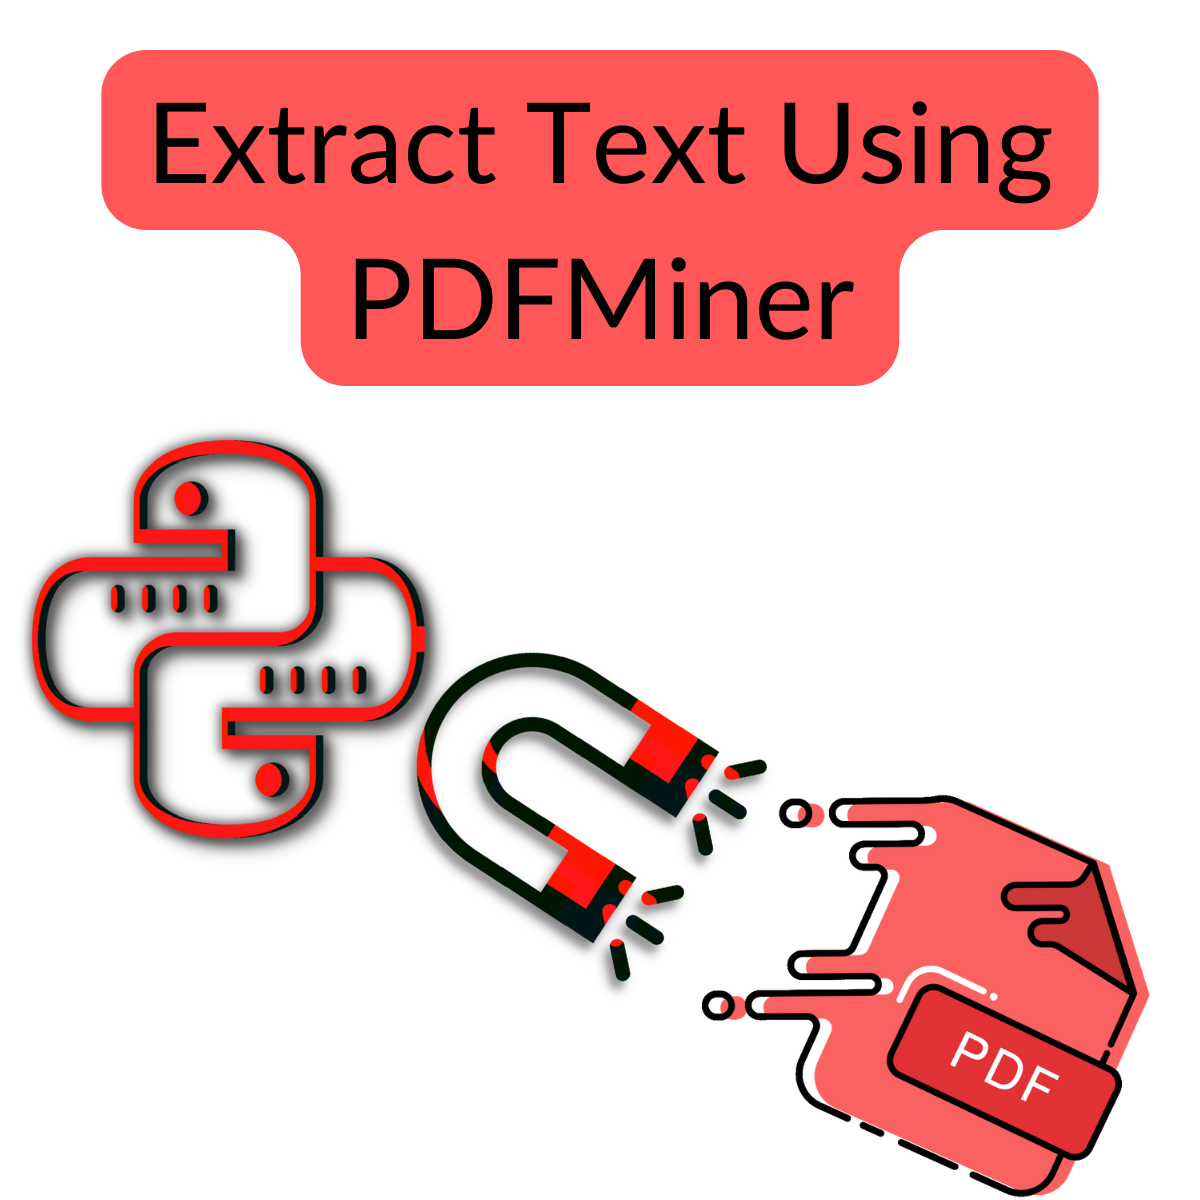 Extract Text Using PDFMiner